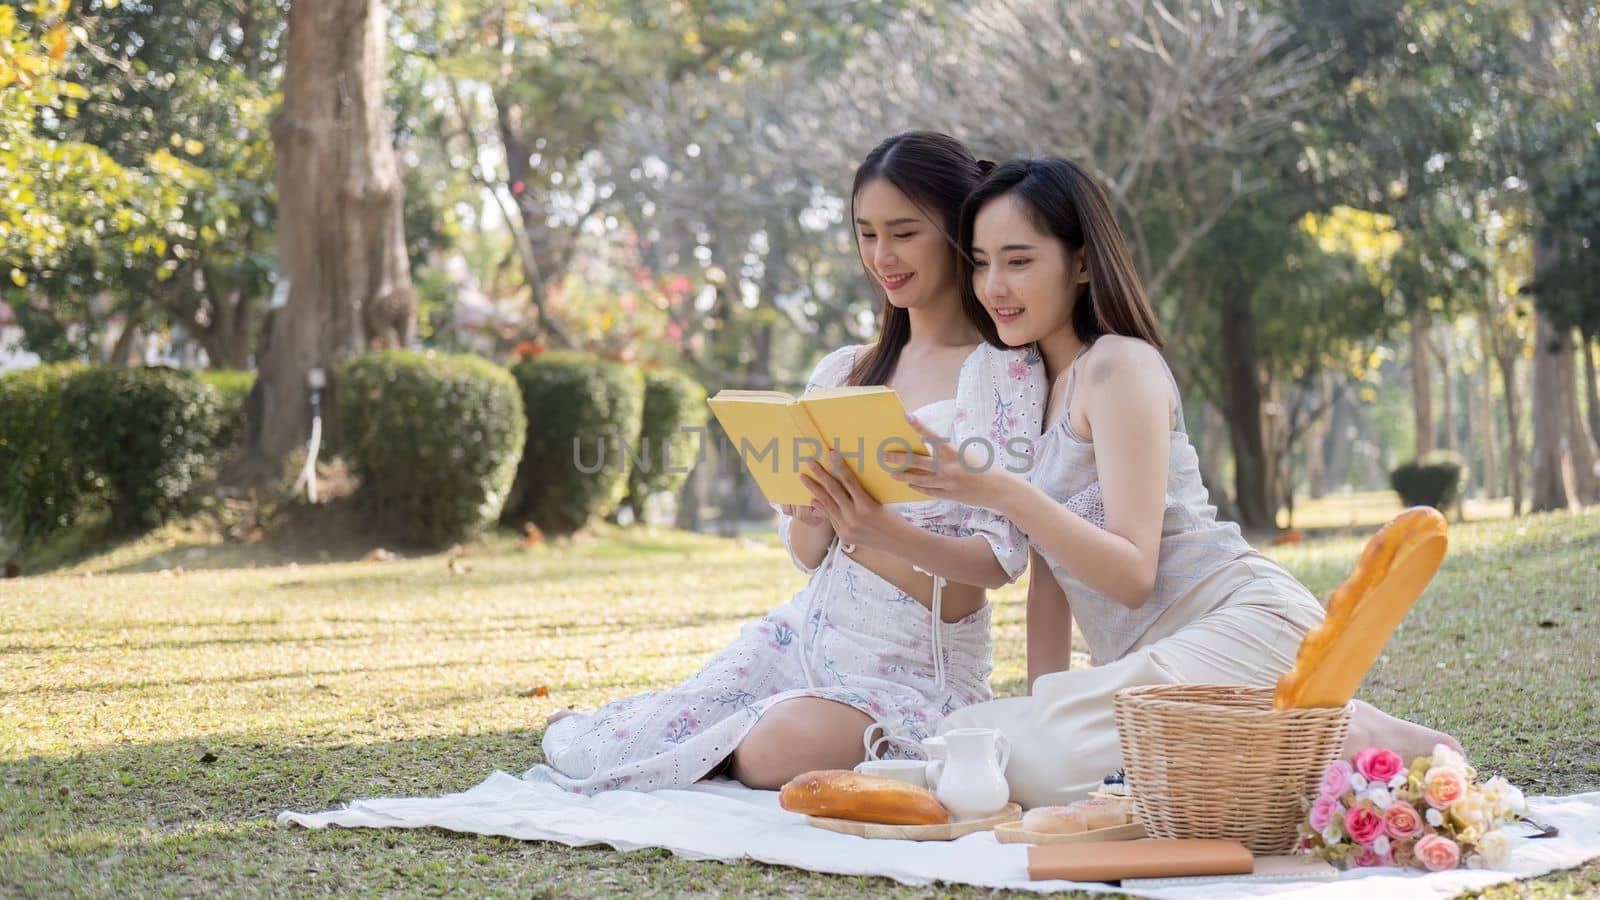 Two young Asian women beautiful read a book while picnicking in the beautiful garden together on the weekend.